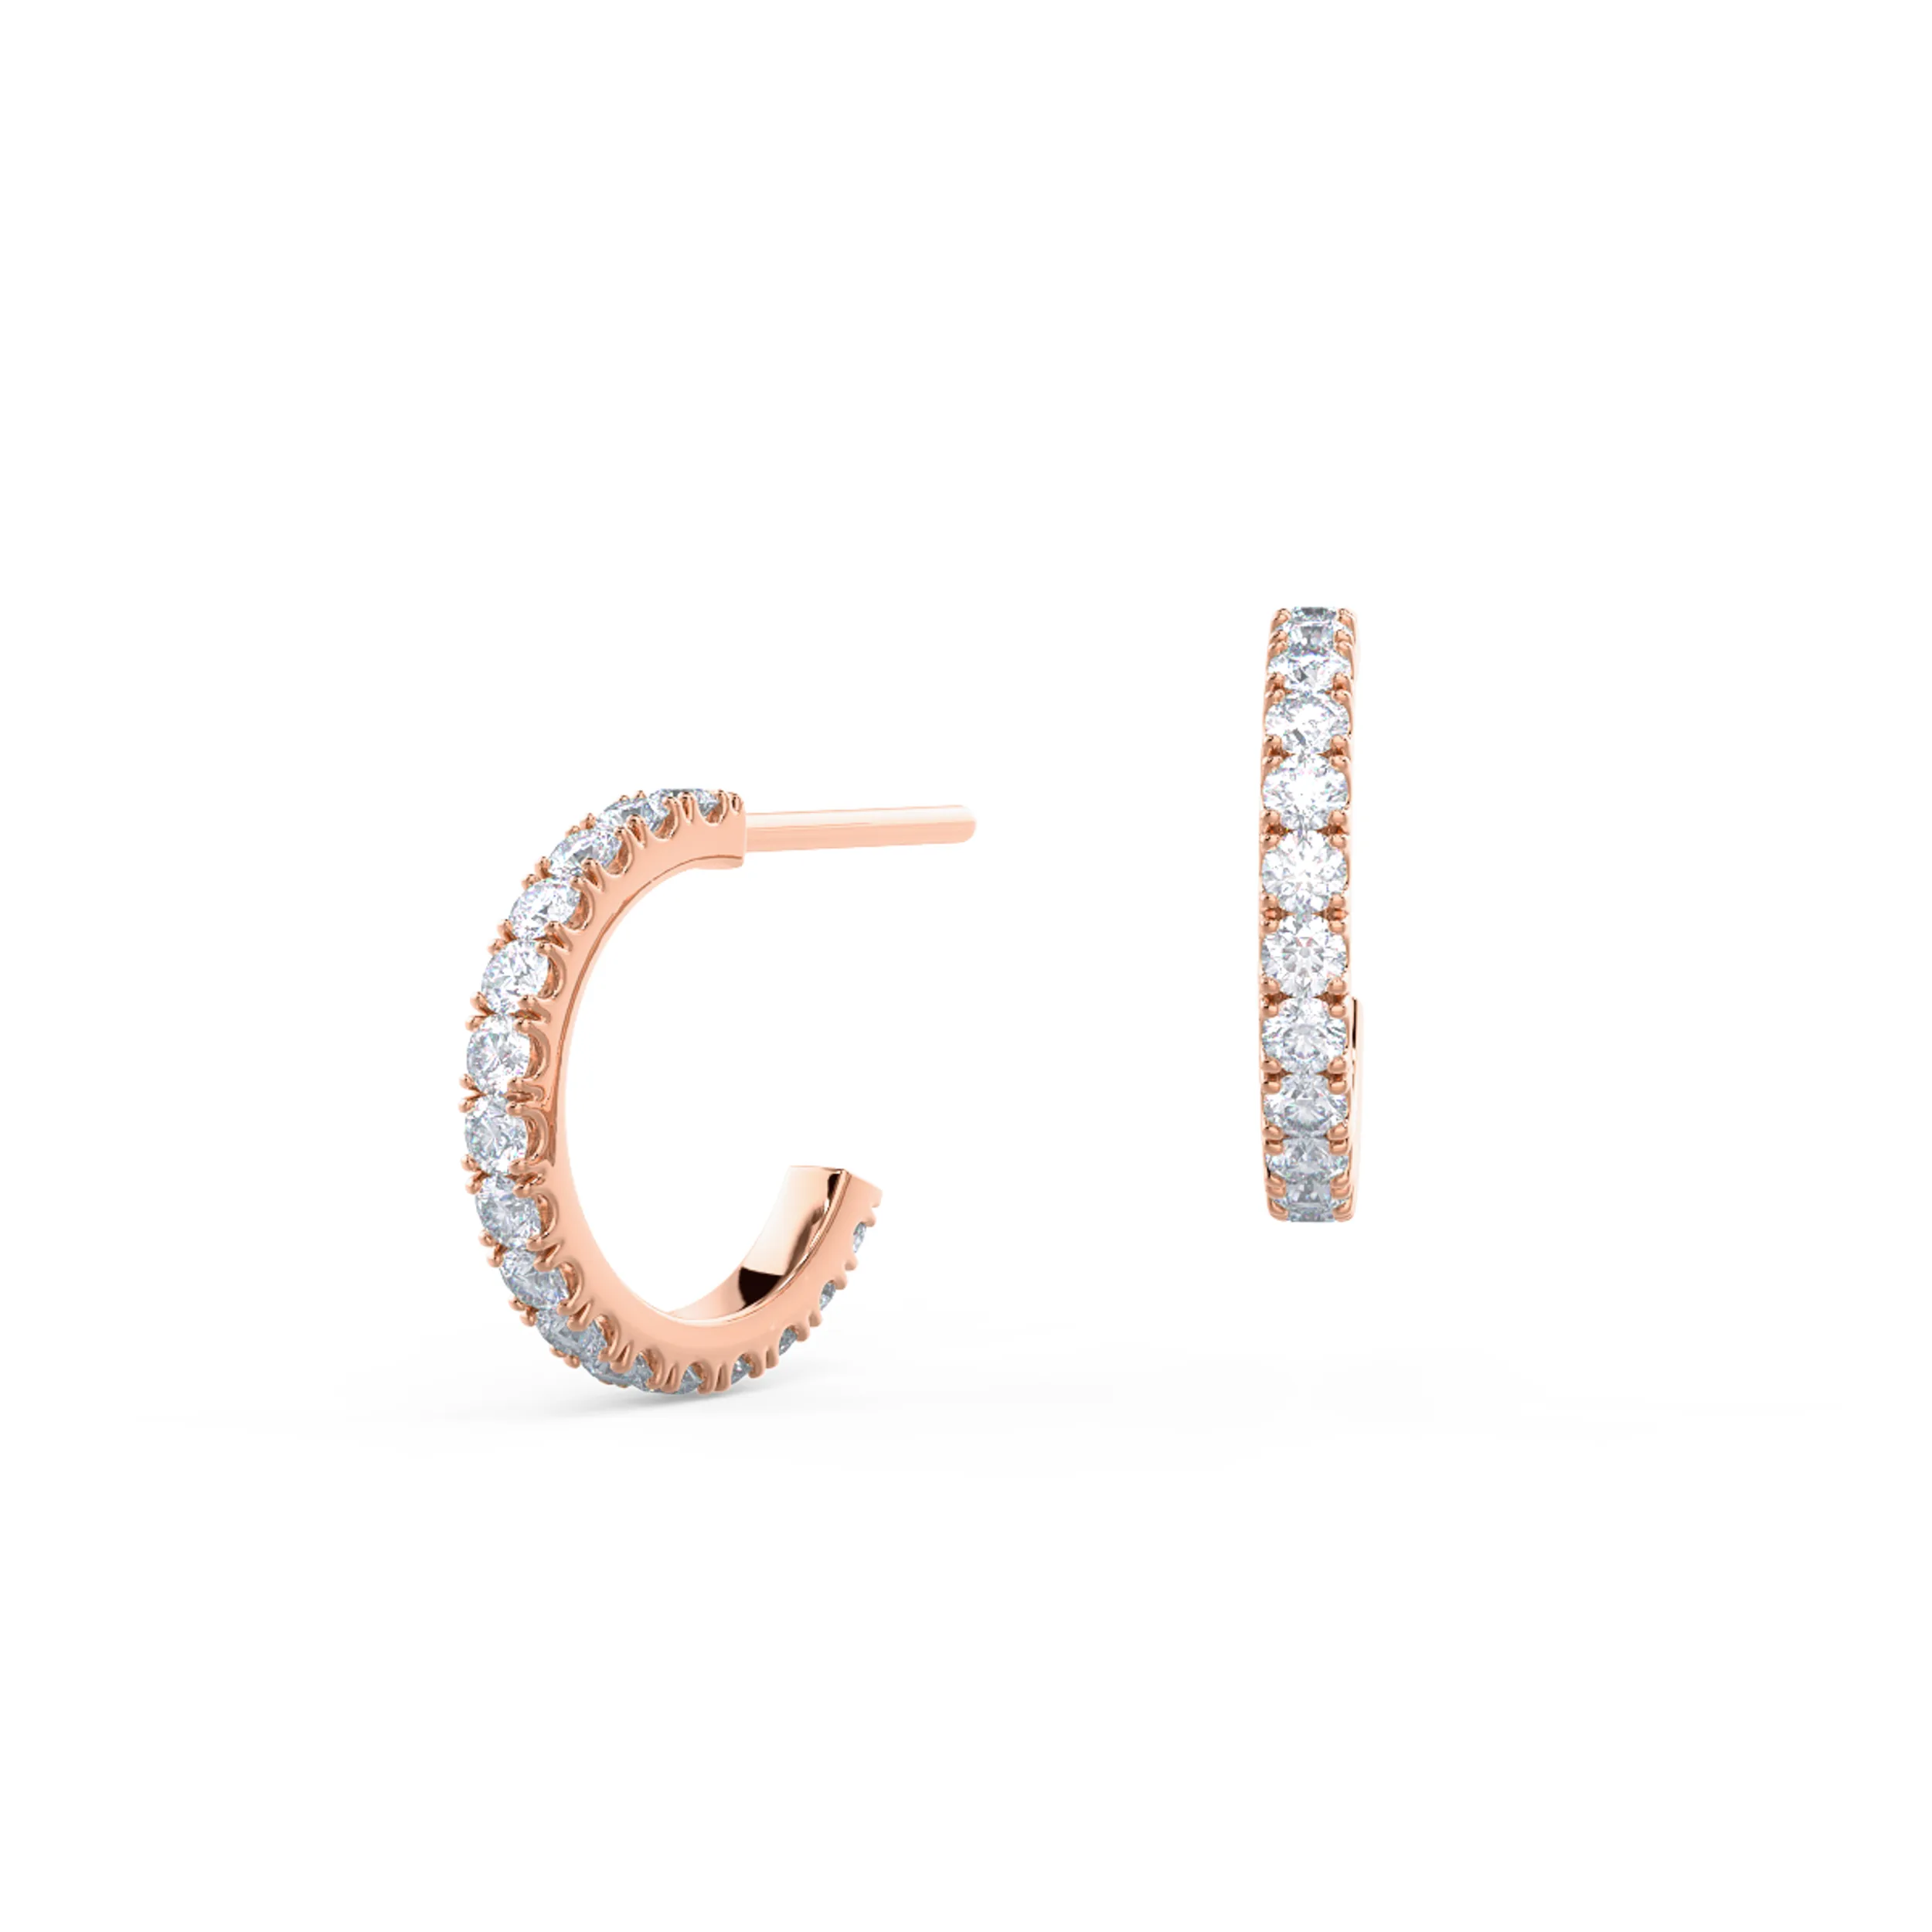 A classic pair of J-shaped huggie hoops featuring pave set lab created diamonds with a tension back in 14k Rose Gold.